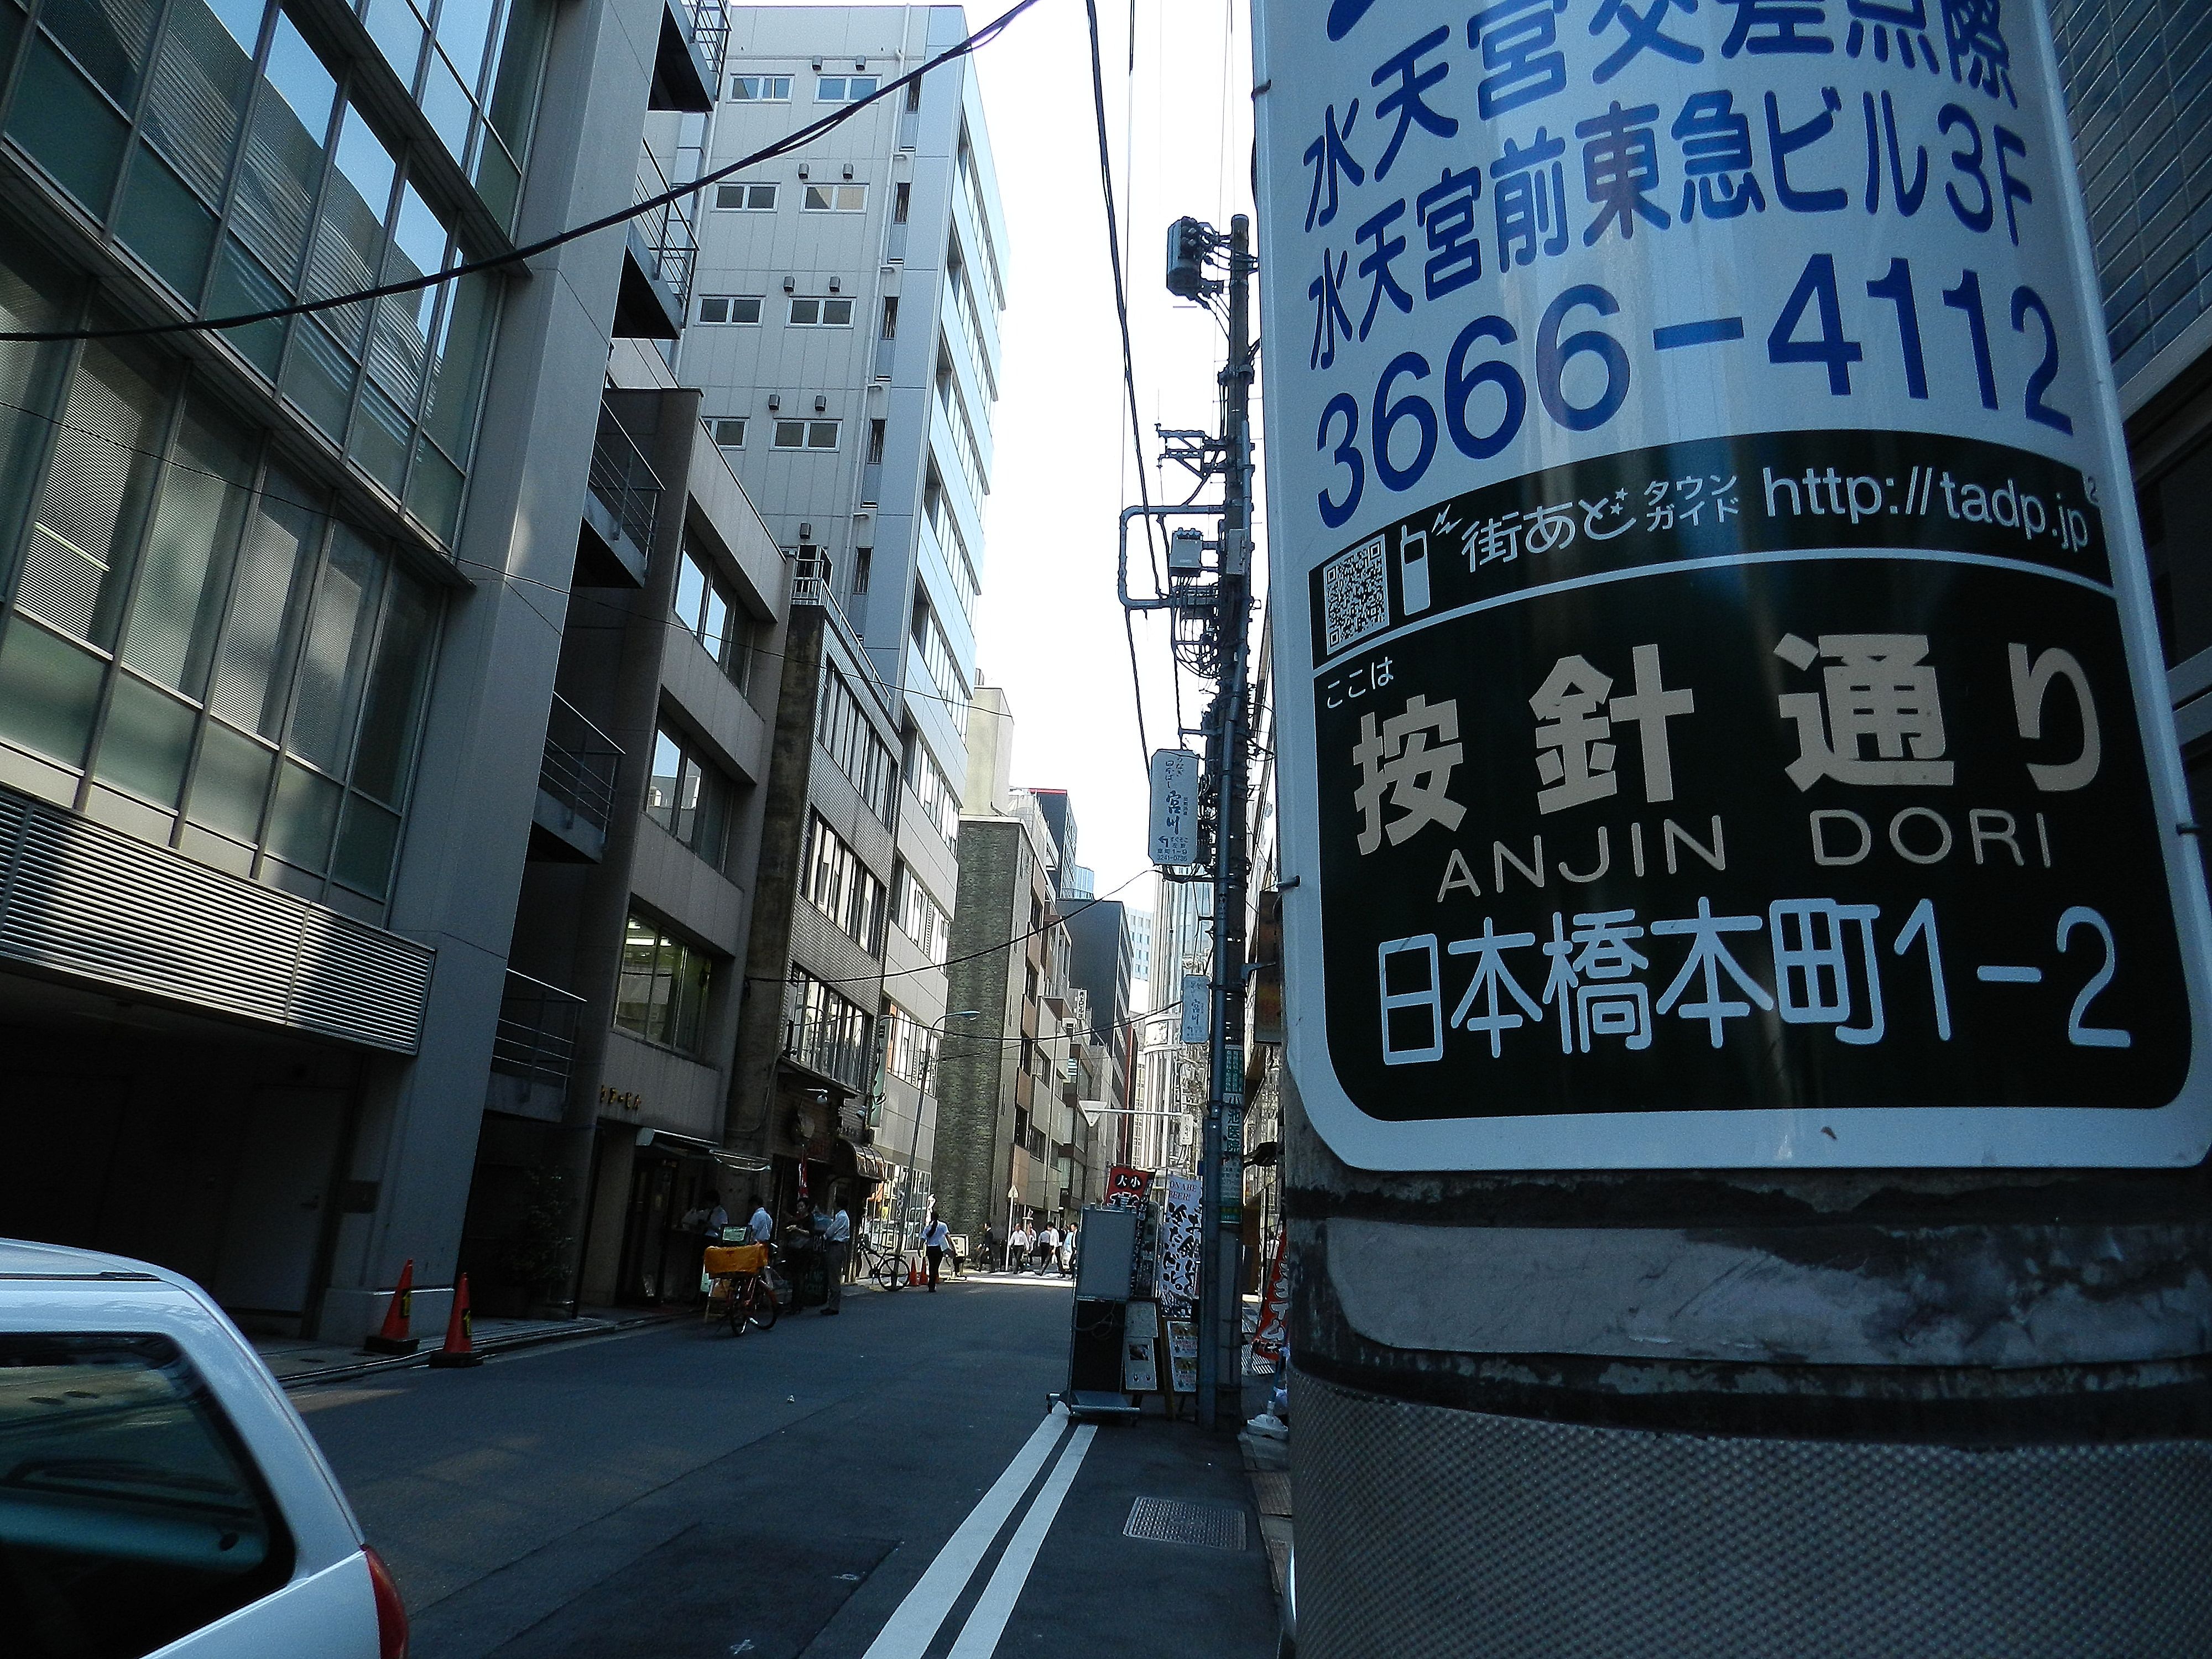 Anjin Dori - the street in modern day Tokyo is named after Adams.